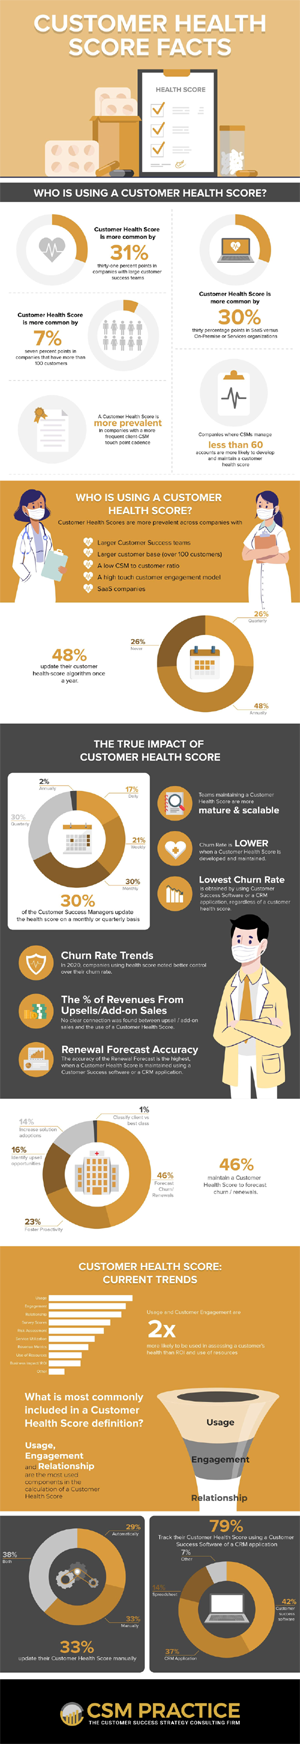 Customer Health Score Facts & Industry Trends